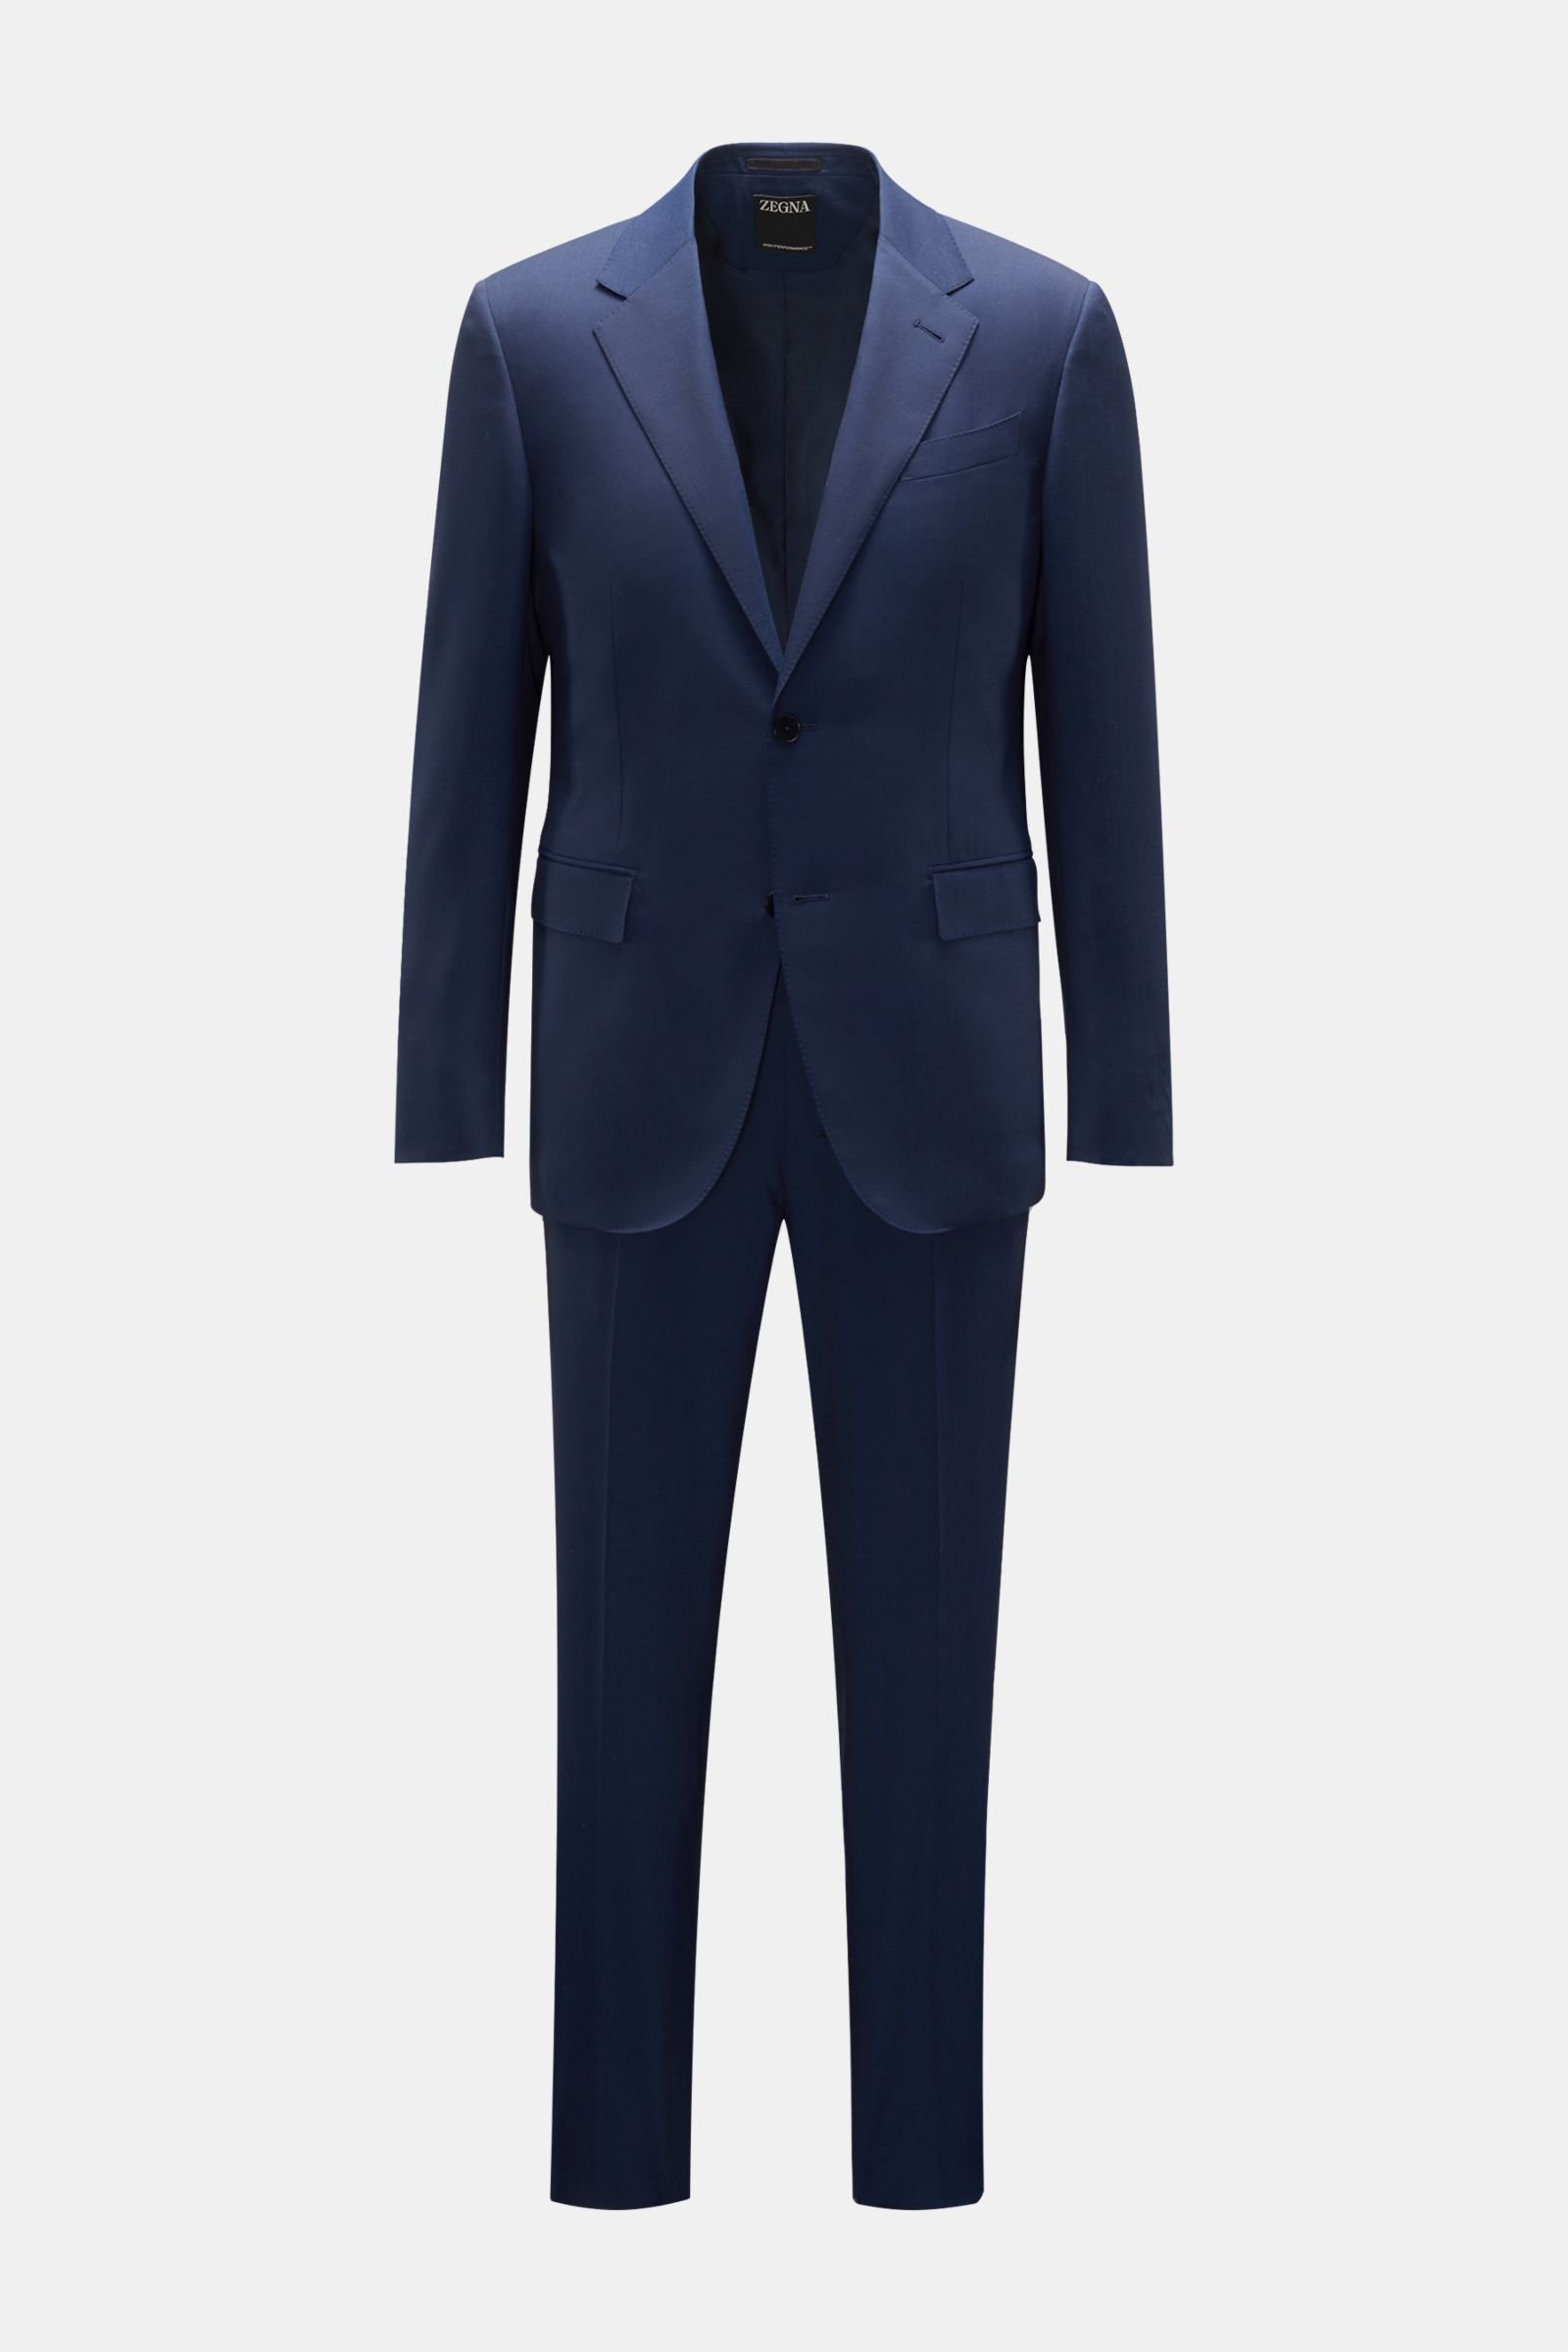 Suit 'High Performance' navy